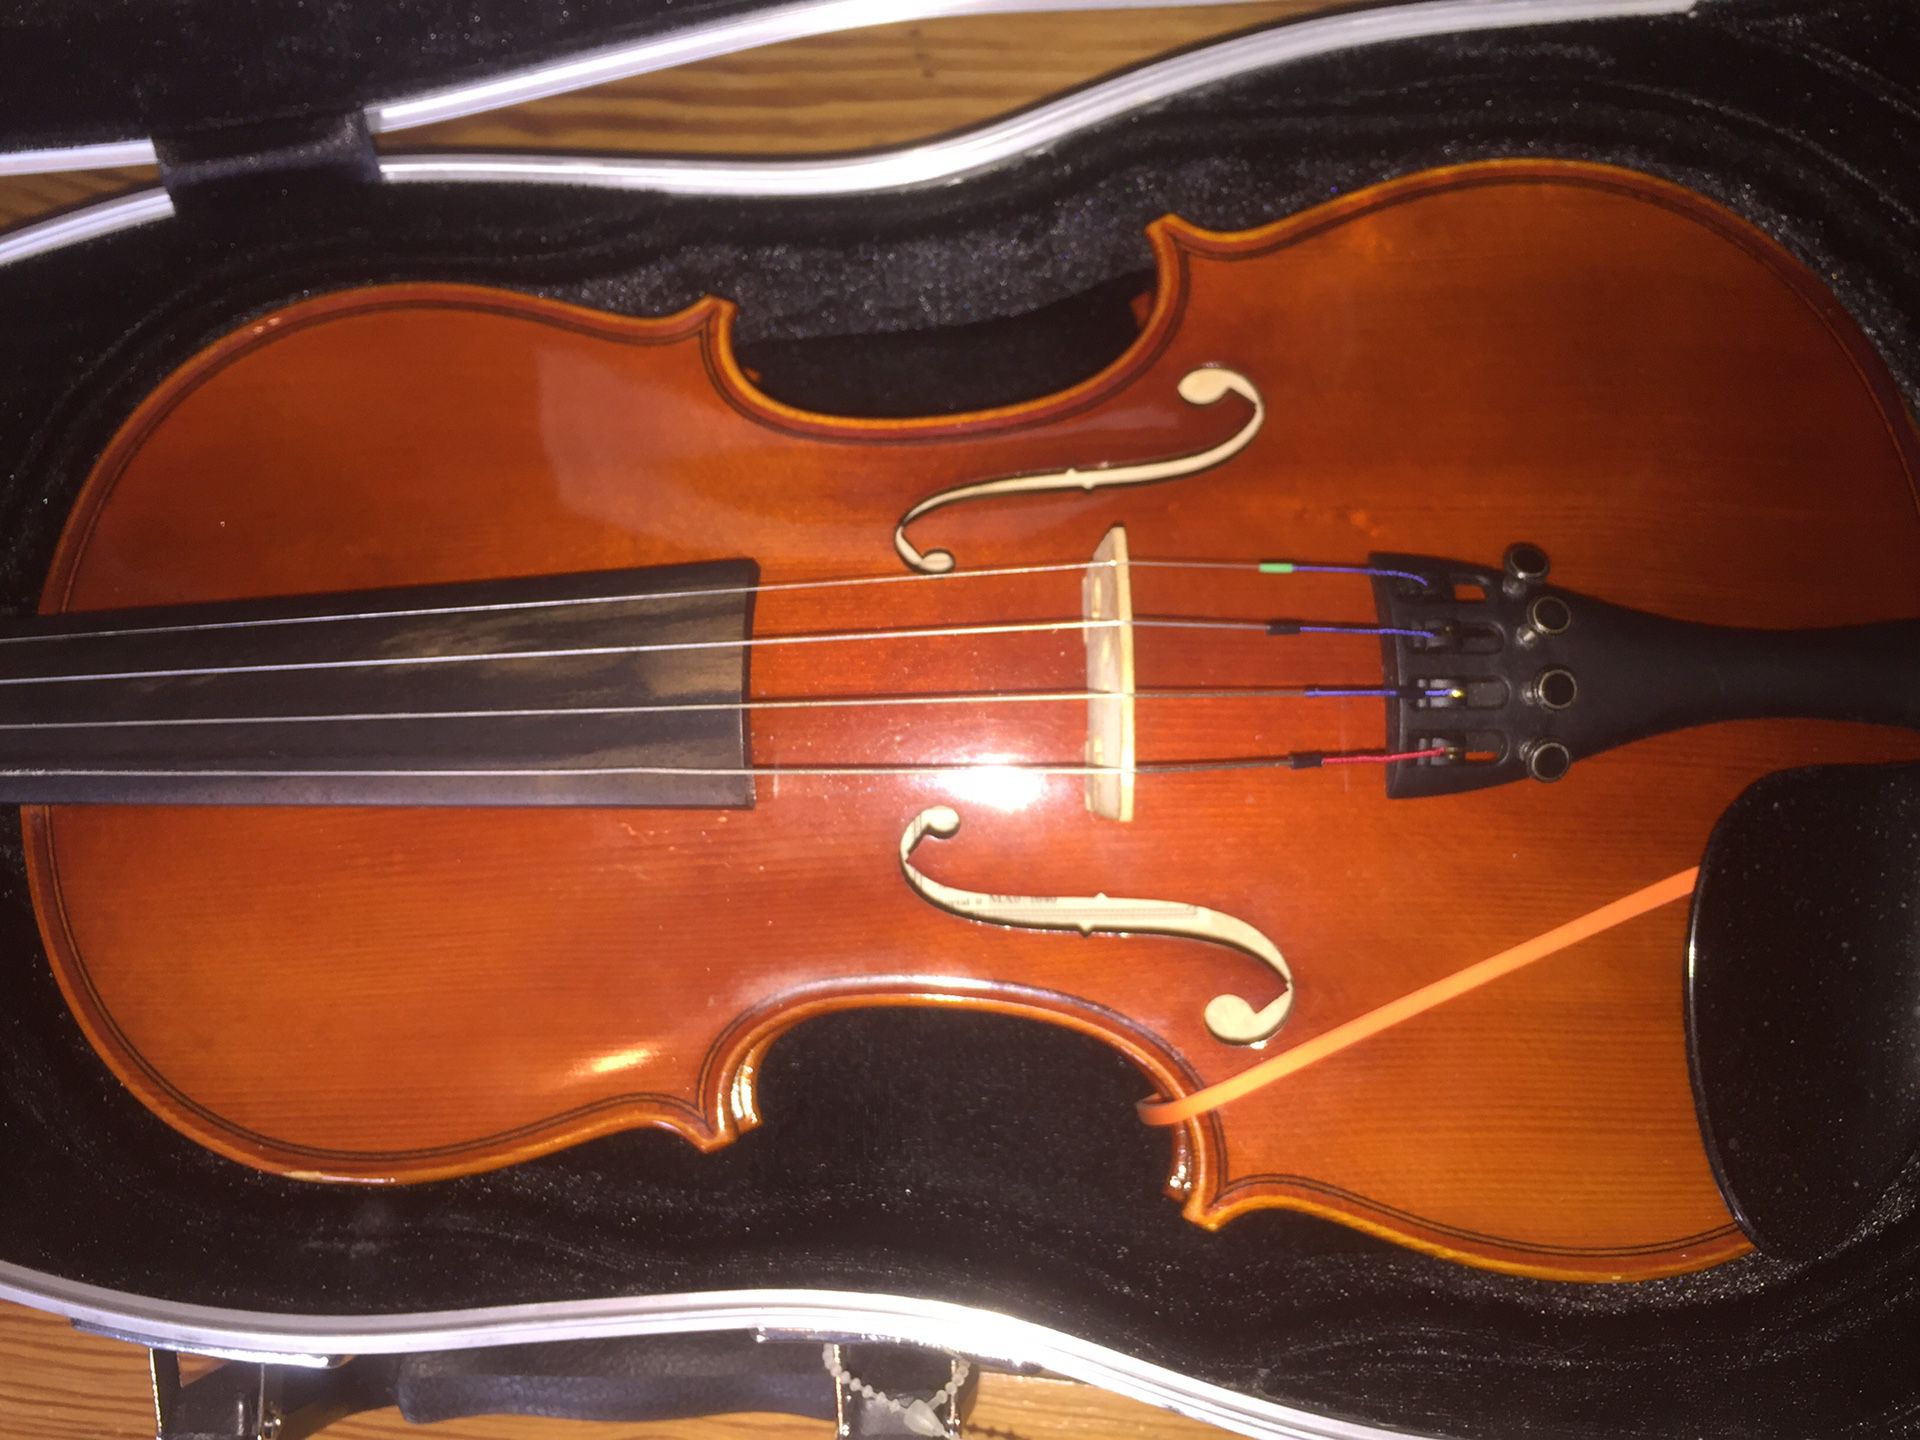 Strobel ML-80 Student Series 3/4 Size Violin Outfit $359